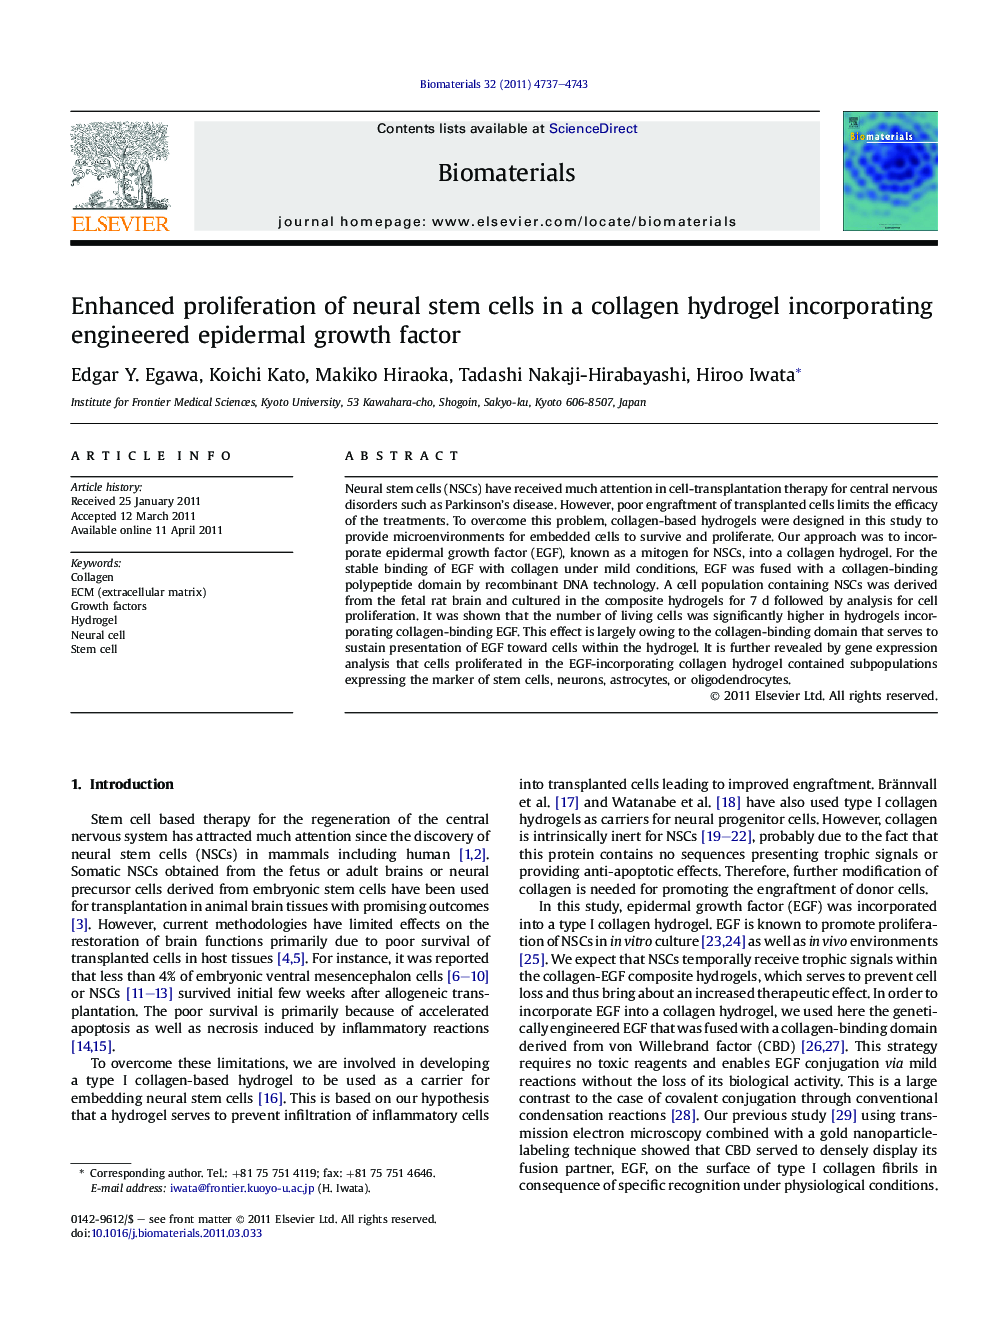 Enhanced proliferation of neural stem cells in a collagen hydrogel incorporating engineered epidermal growth factor